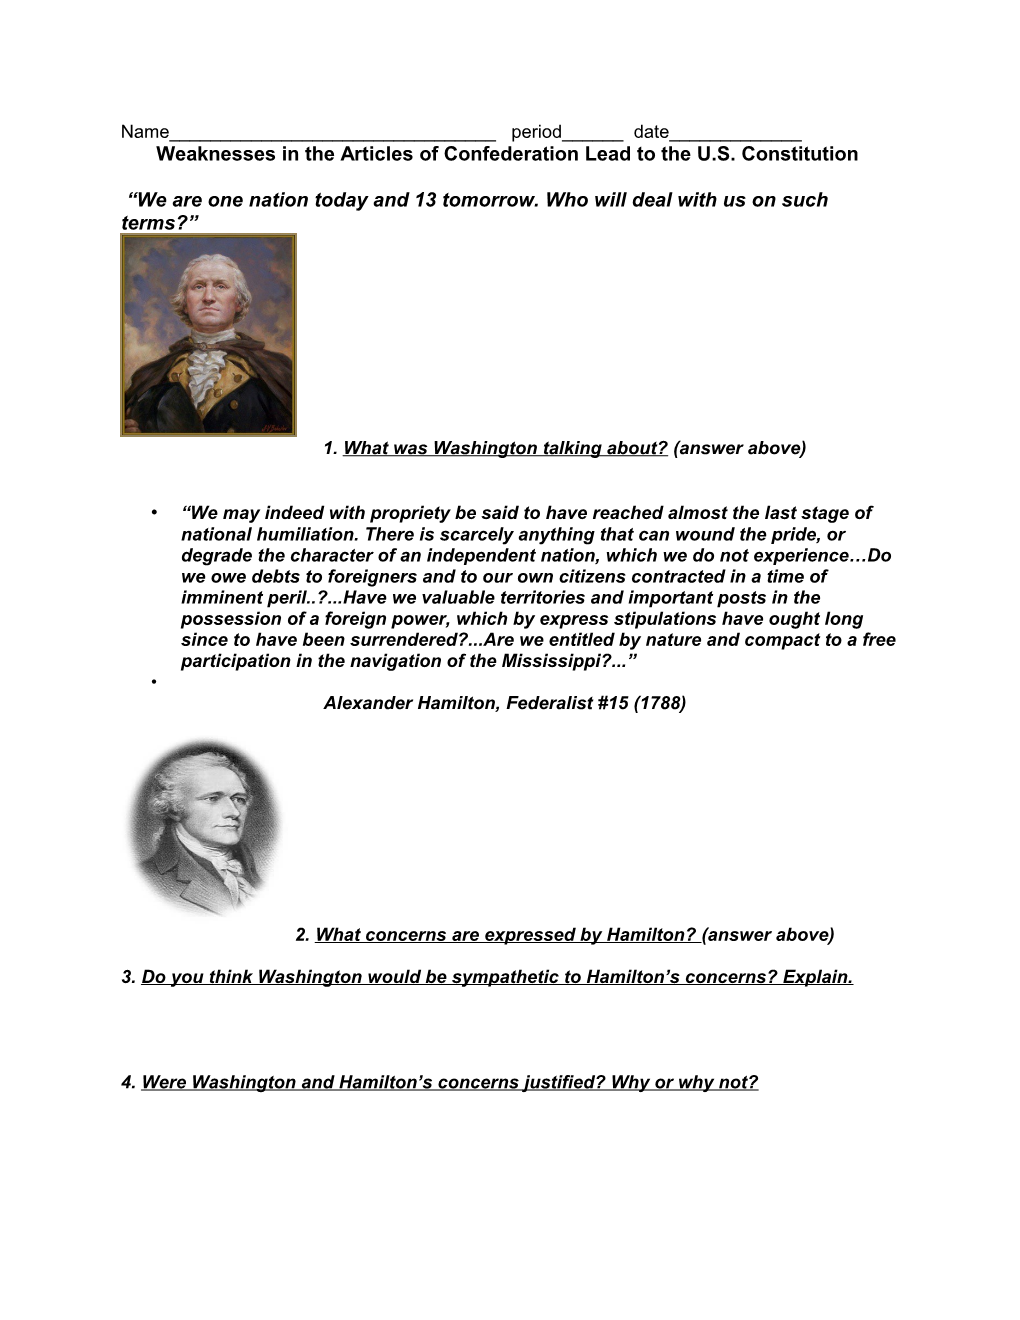 Weaknesses in the Articles of Confederation Lead to the U.S. Constitution